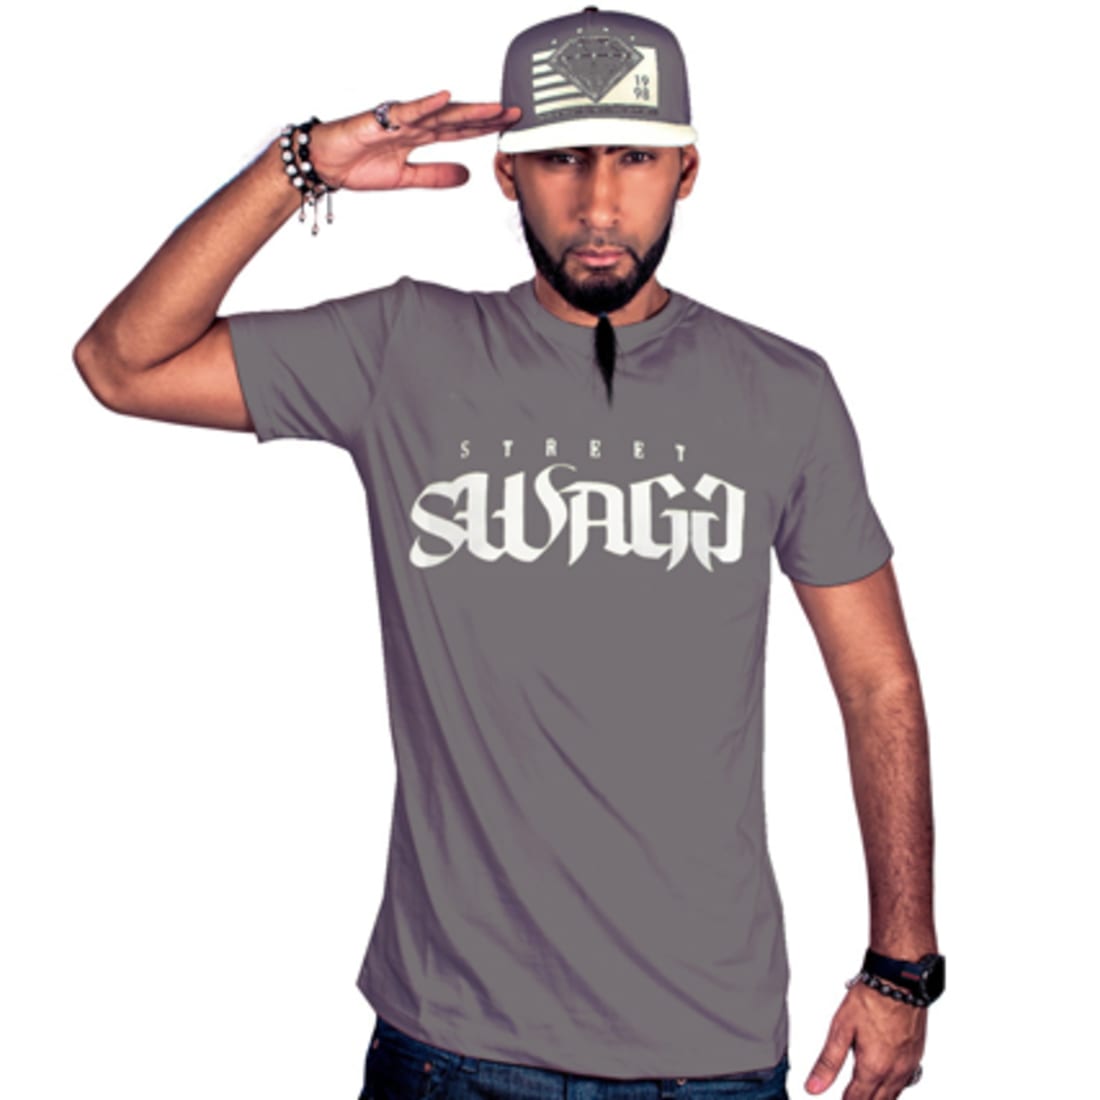 Swagg - Tee Shirt Swagg Classic Gris Souris Typo Blanc - LaBoutiqueOfficielle.com